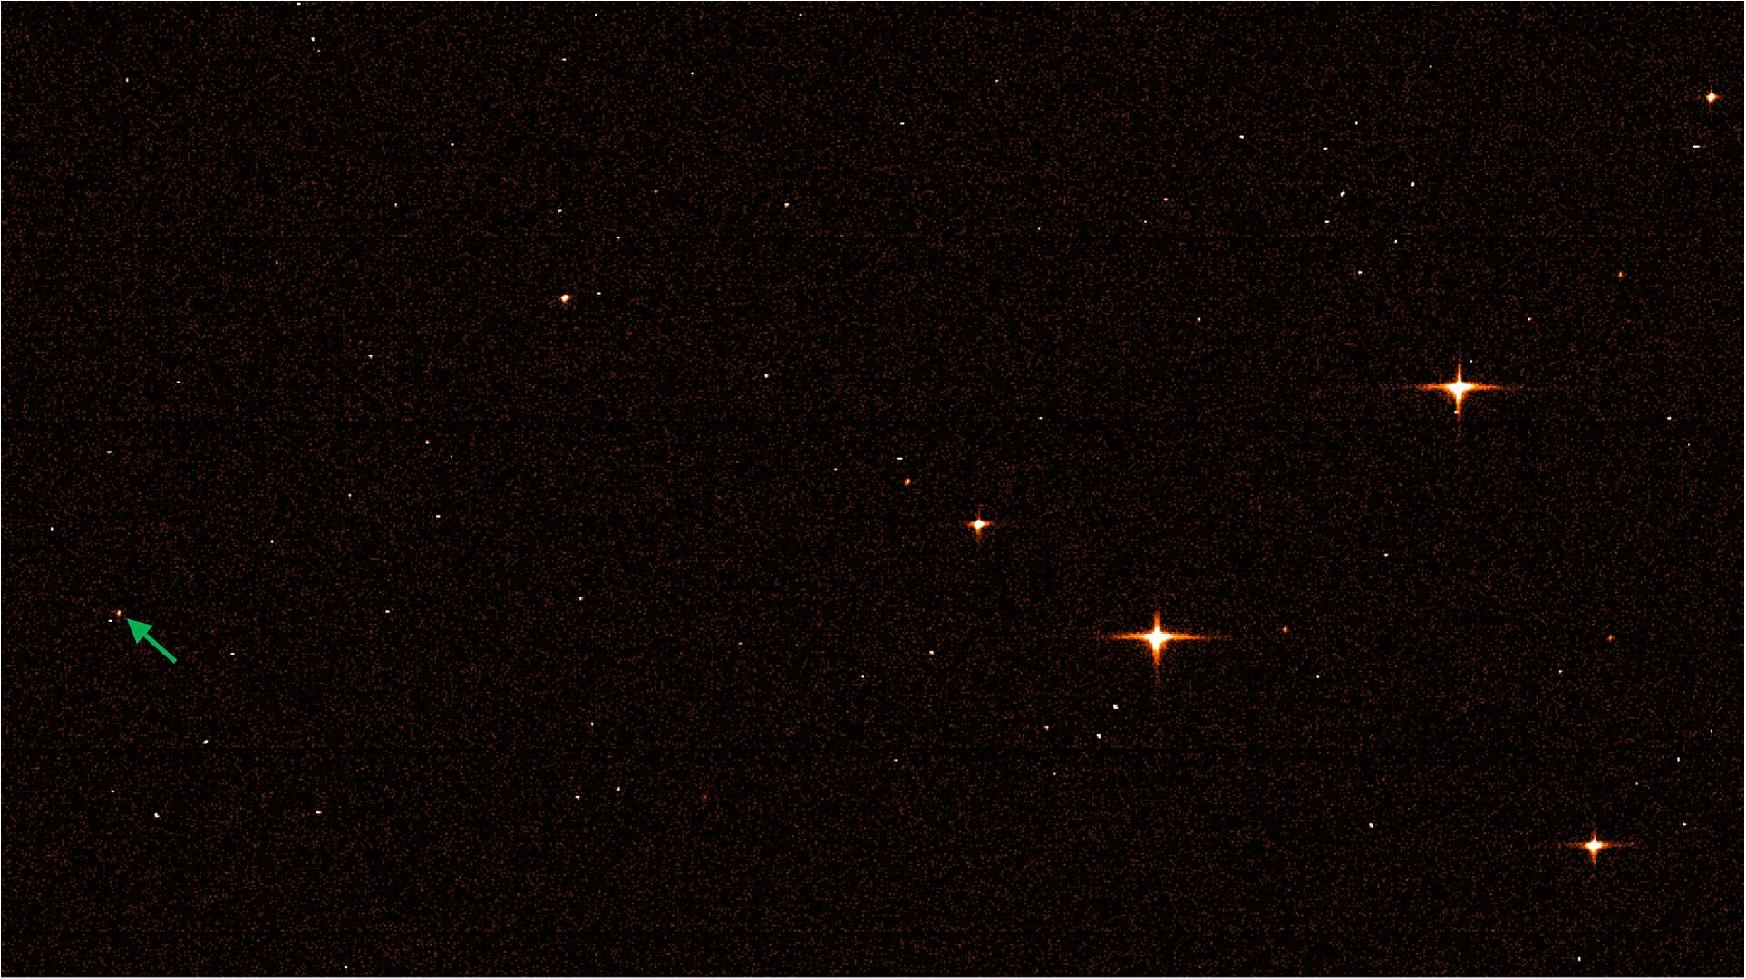 Figure 32: Gaia snaps photo of Webb. Gaia’s sky mapper image showing the James Webb Space Telescope. The reddish colour is artificial, chosen just for illustrative reasons. The frame shows a few relatively bright stars, several faint stars, a few disturbances – and a spacecraft. It is marked by the green arrow (image credit: ESA/Gaia/DPAC; CC BY-SA 3.0 IGO)